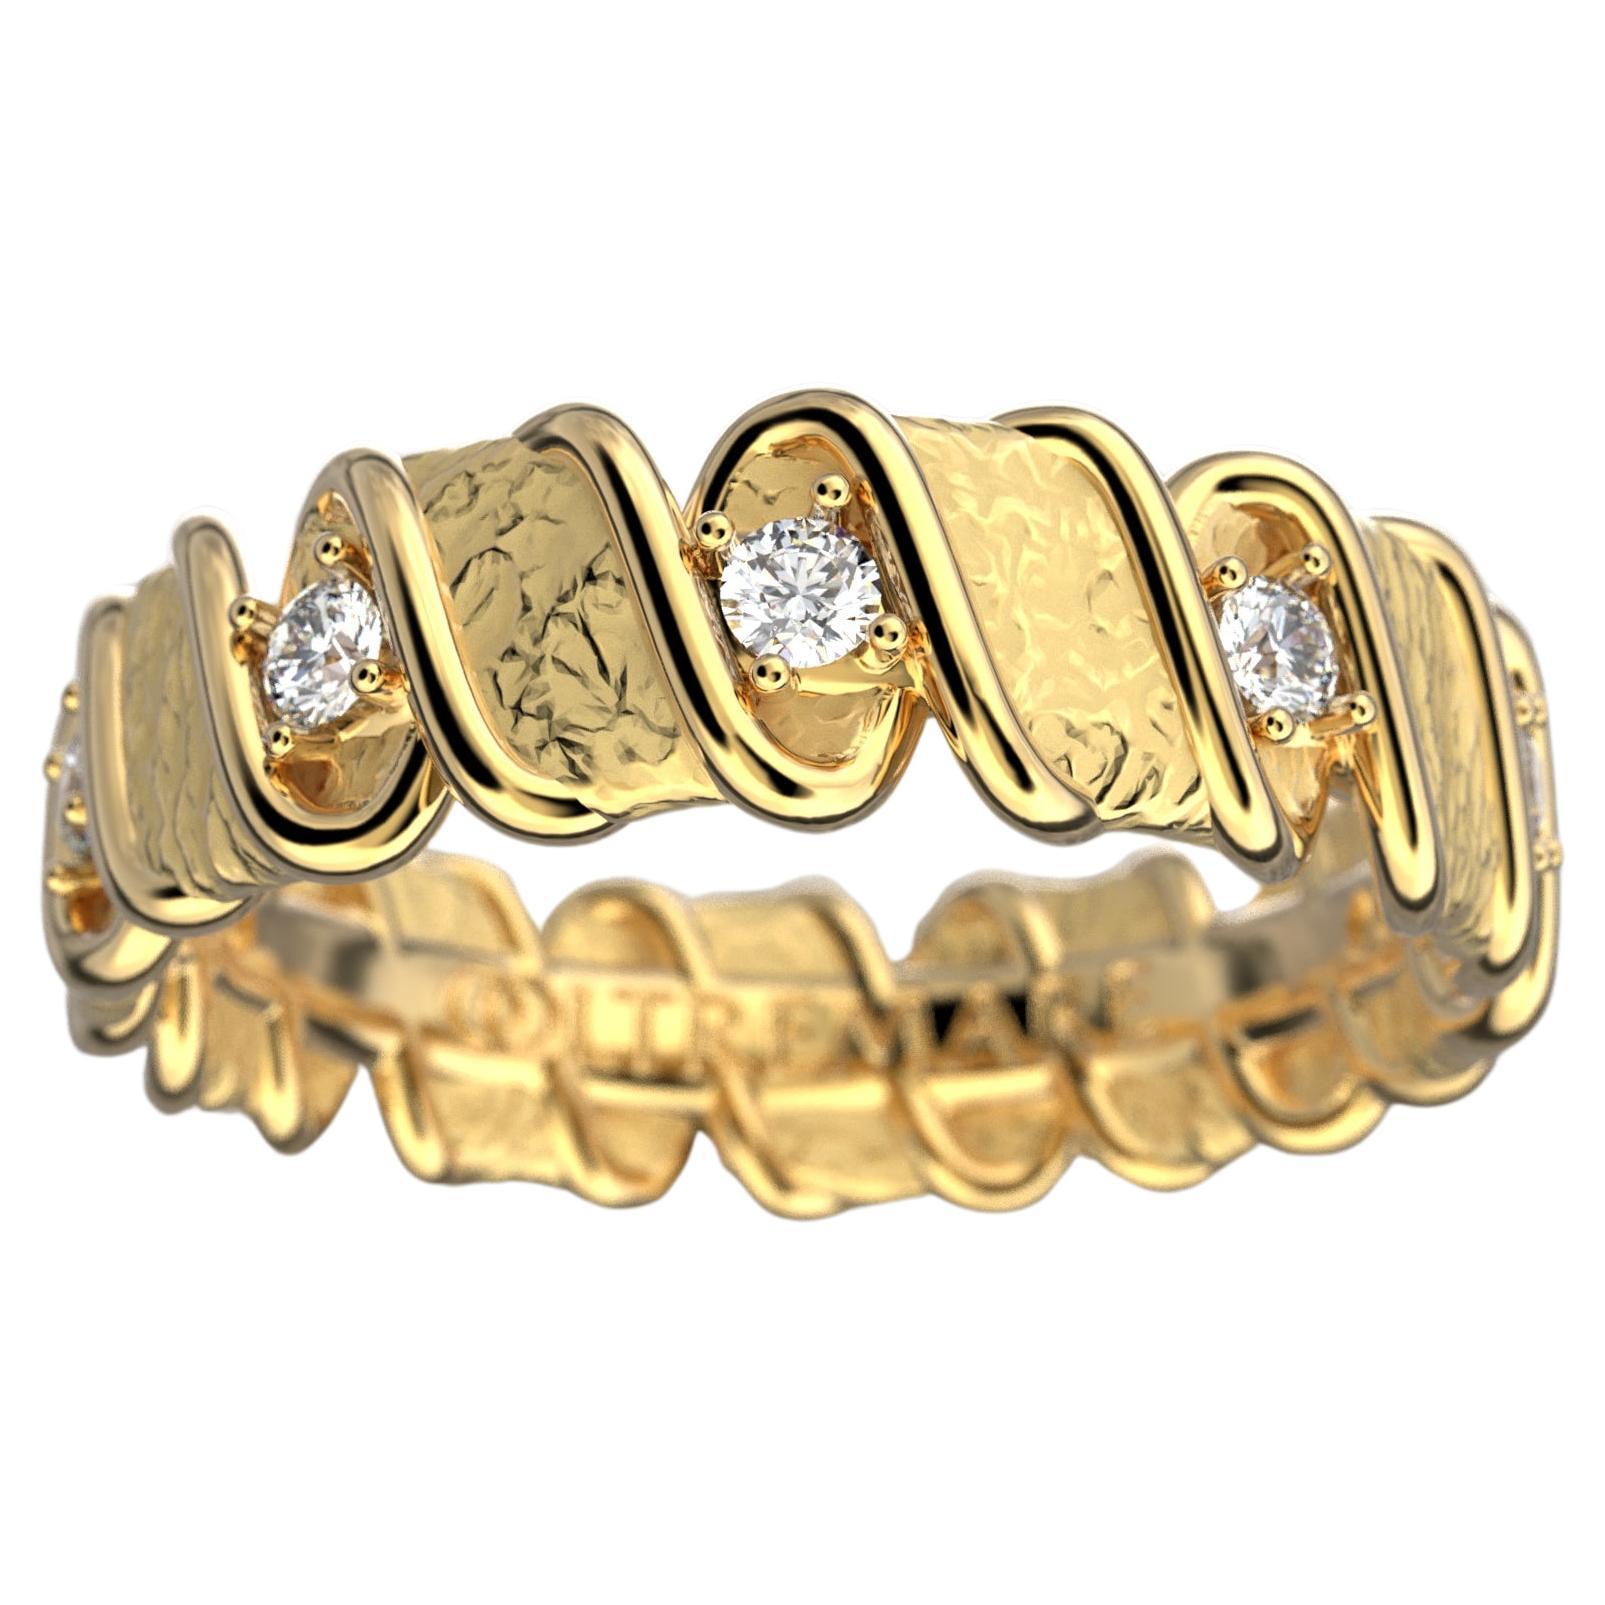 For Sale:  Italian Diamond Eternity Gold Band Made in Italy in 18k By Oltremare Gioielli